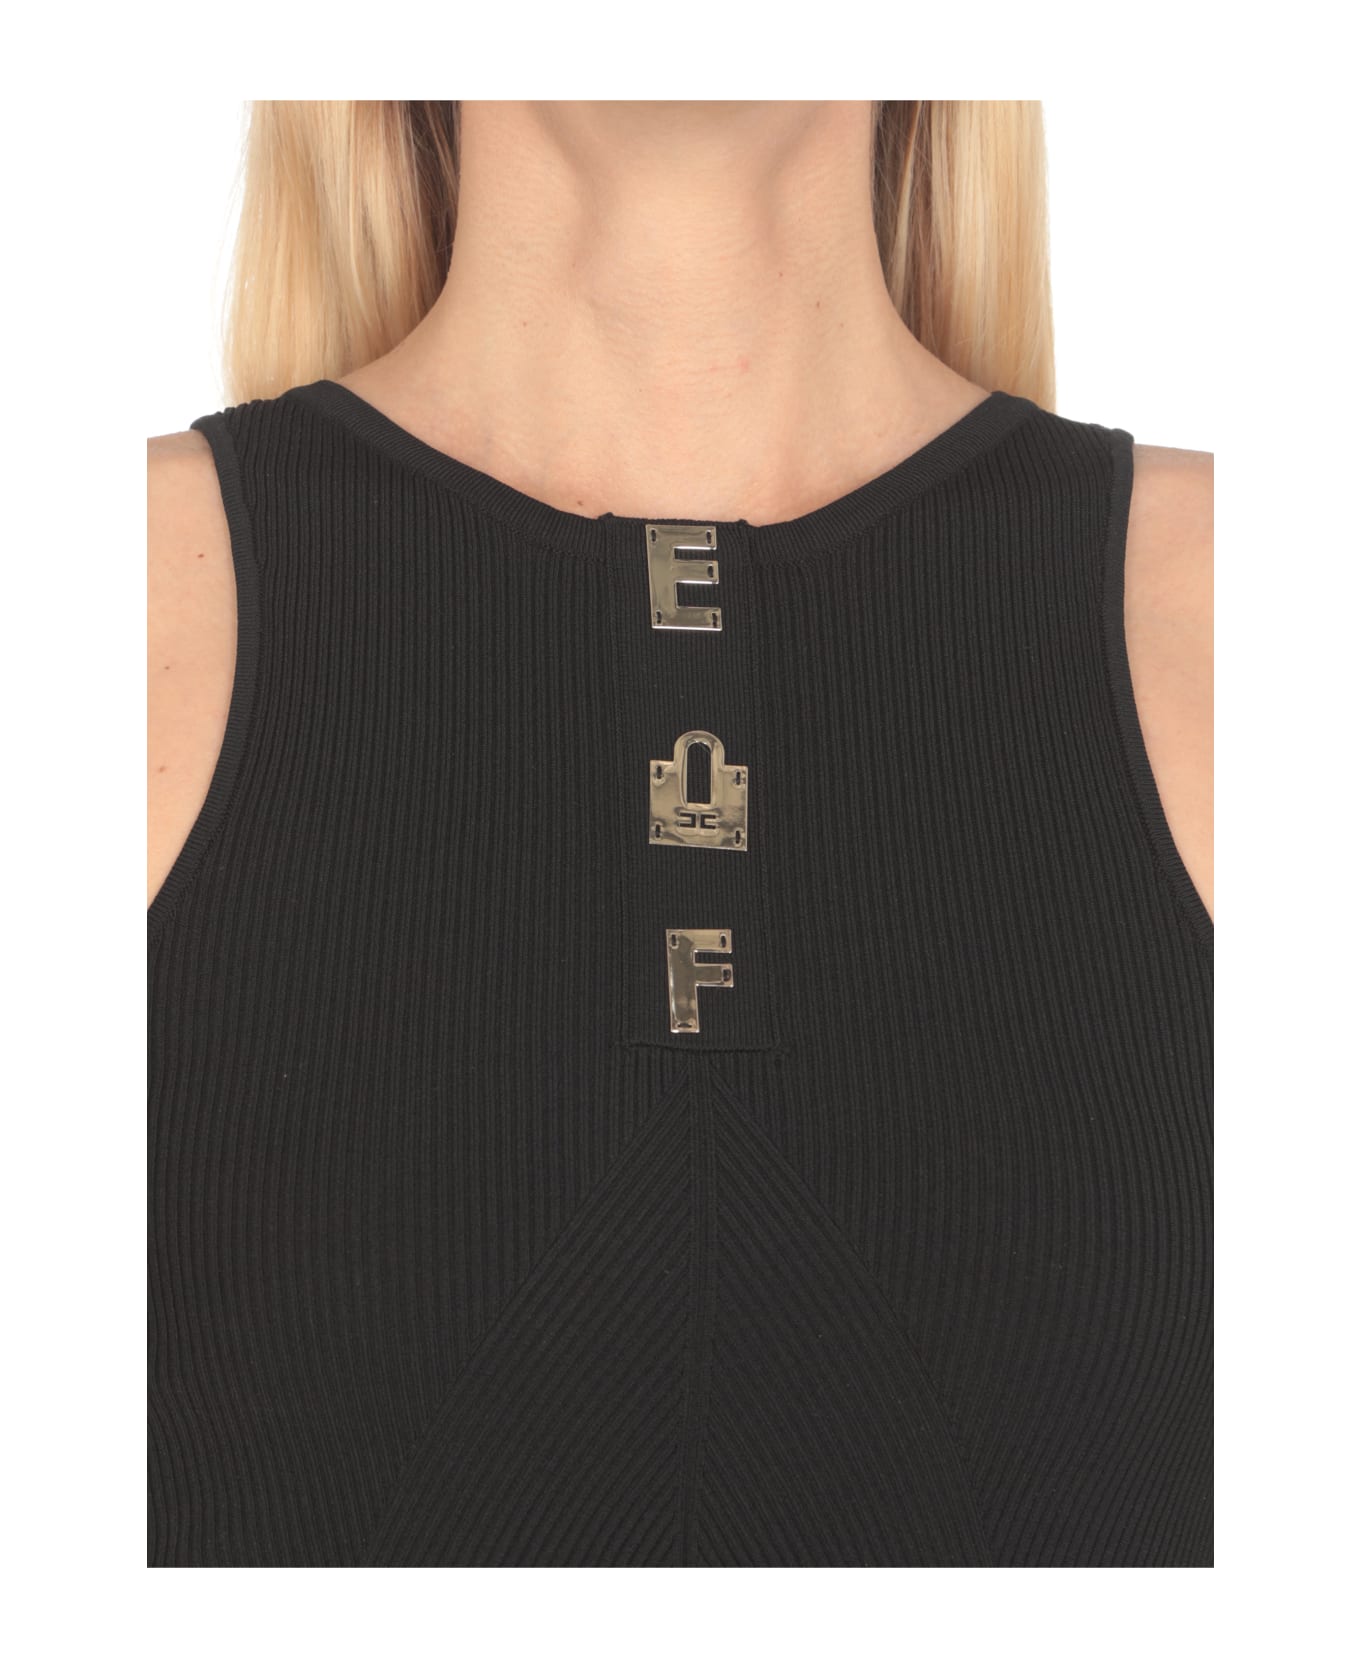 Elisabetta Franchi Cropped Top With Lettering - Black タンクトップ